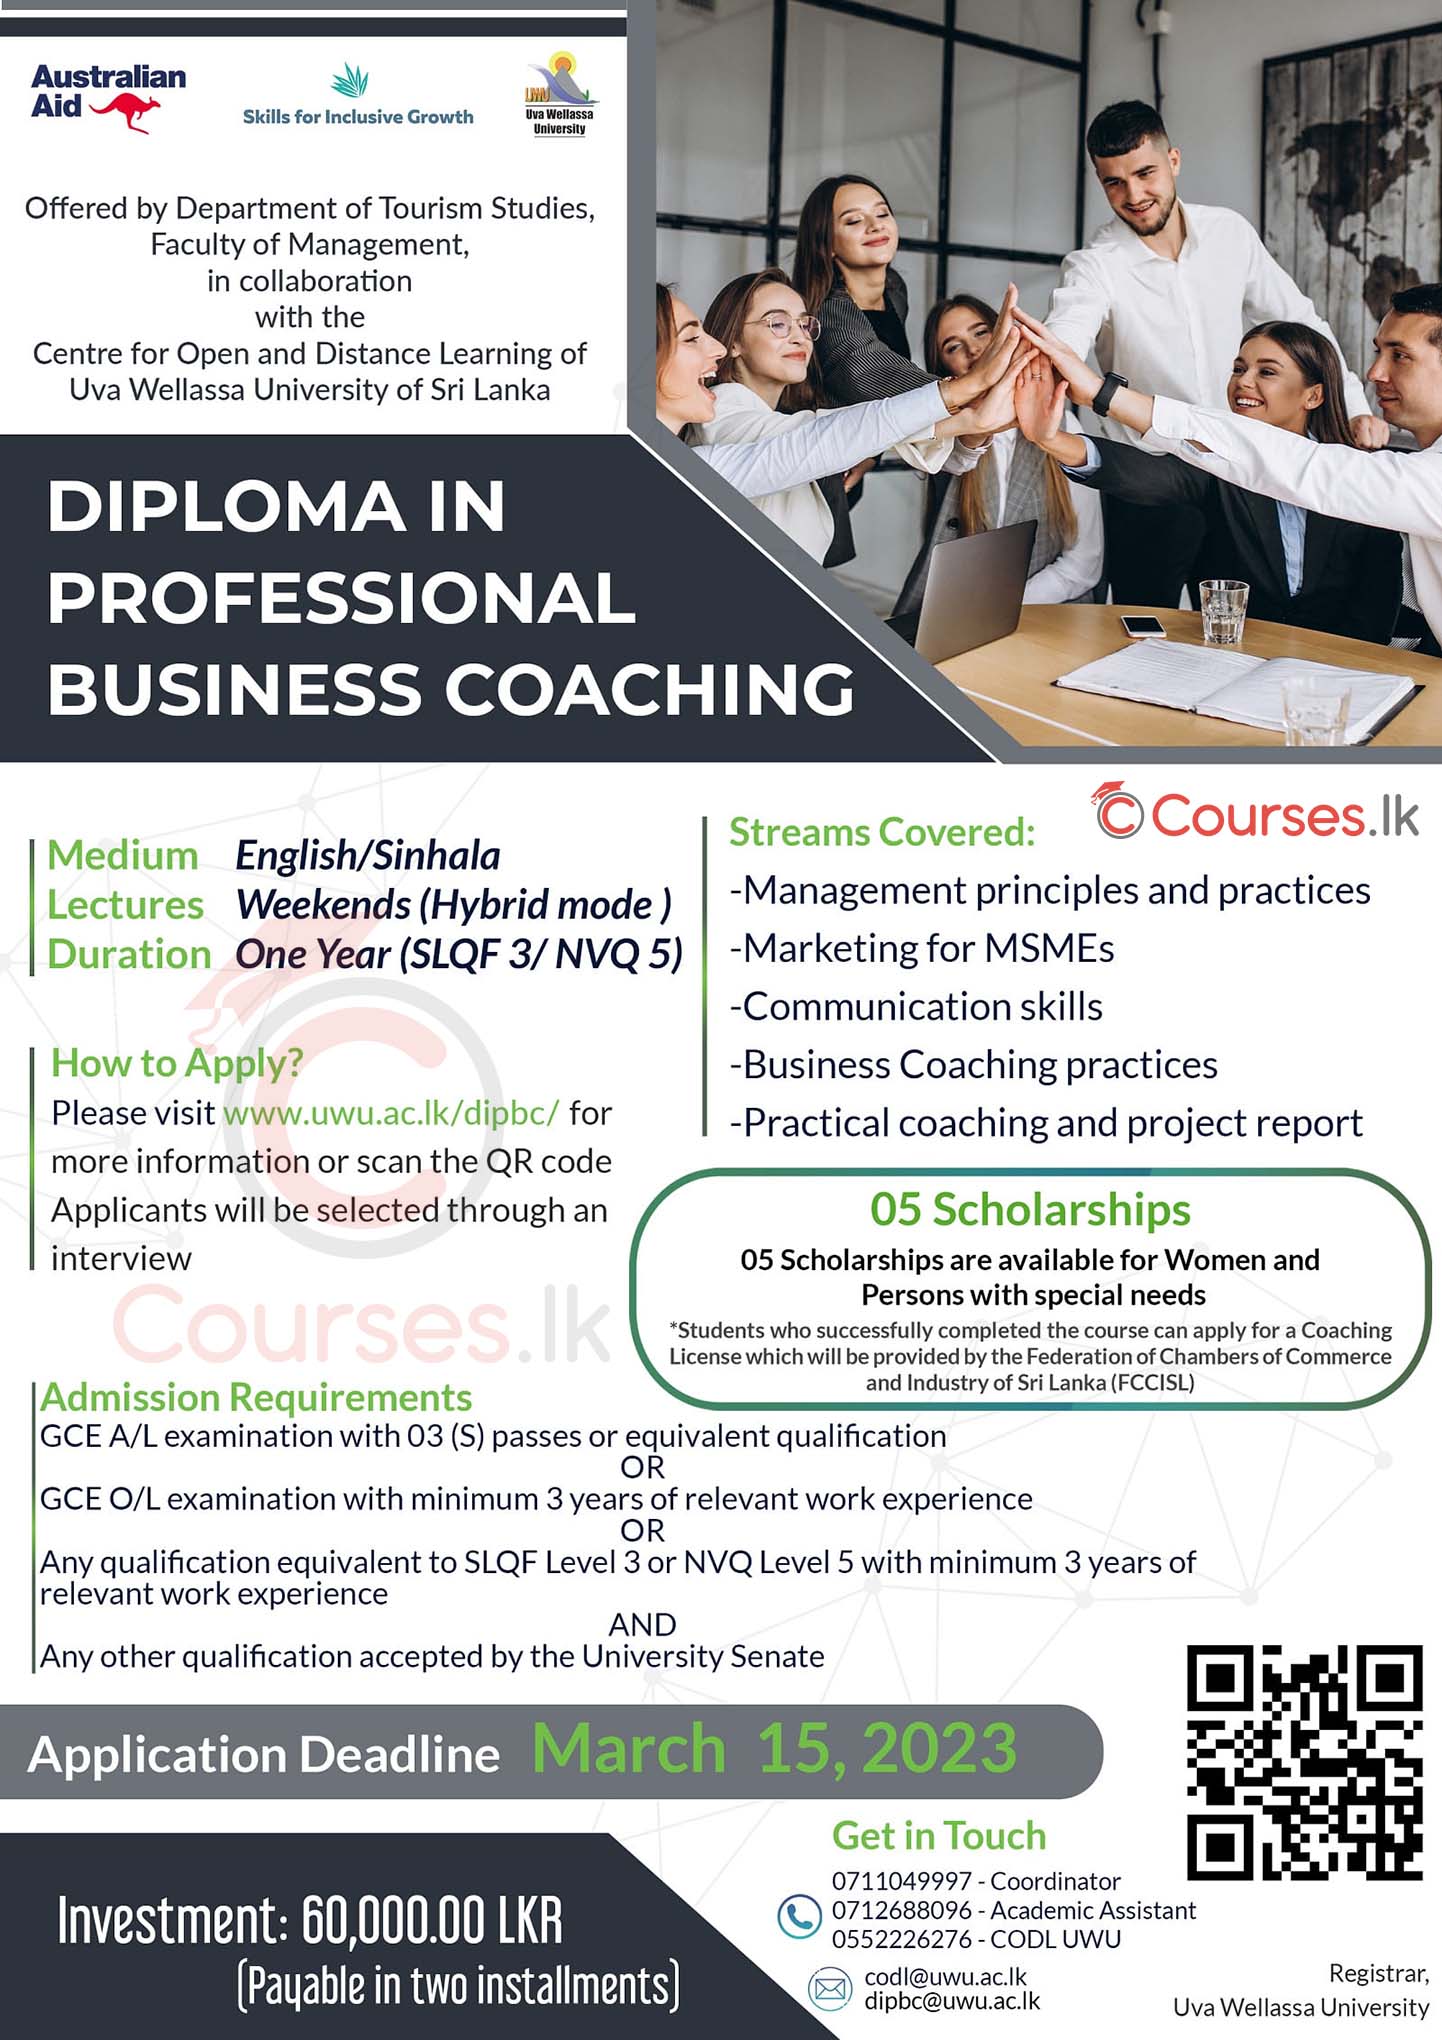 Call for Applications - Diploma in Professional Business Coaching (2023) - Uva Wellassa University